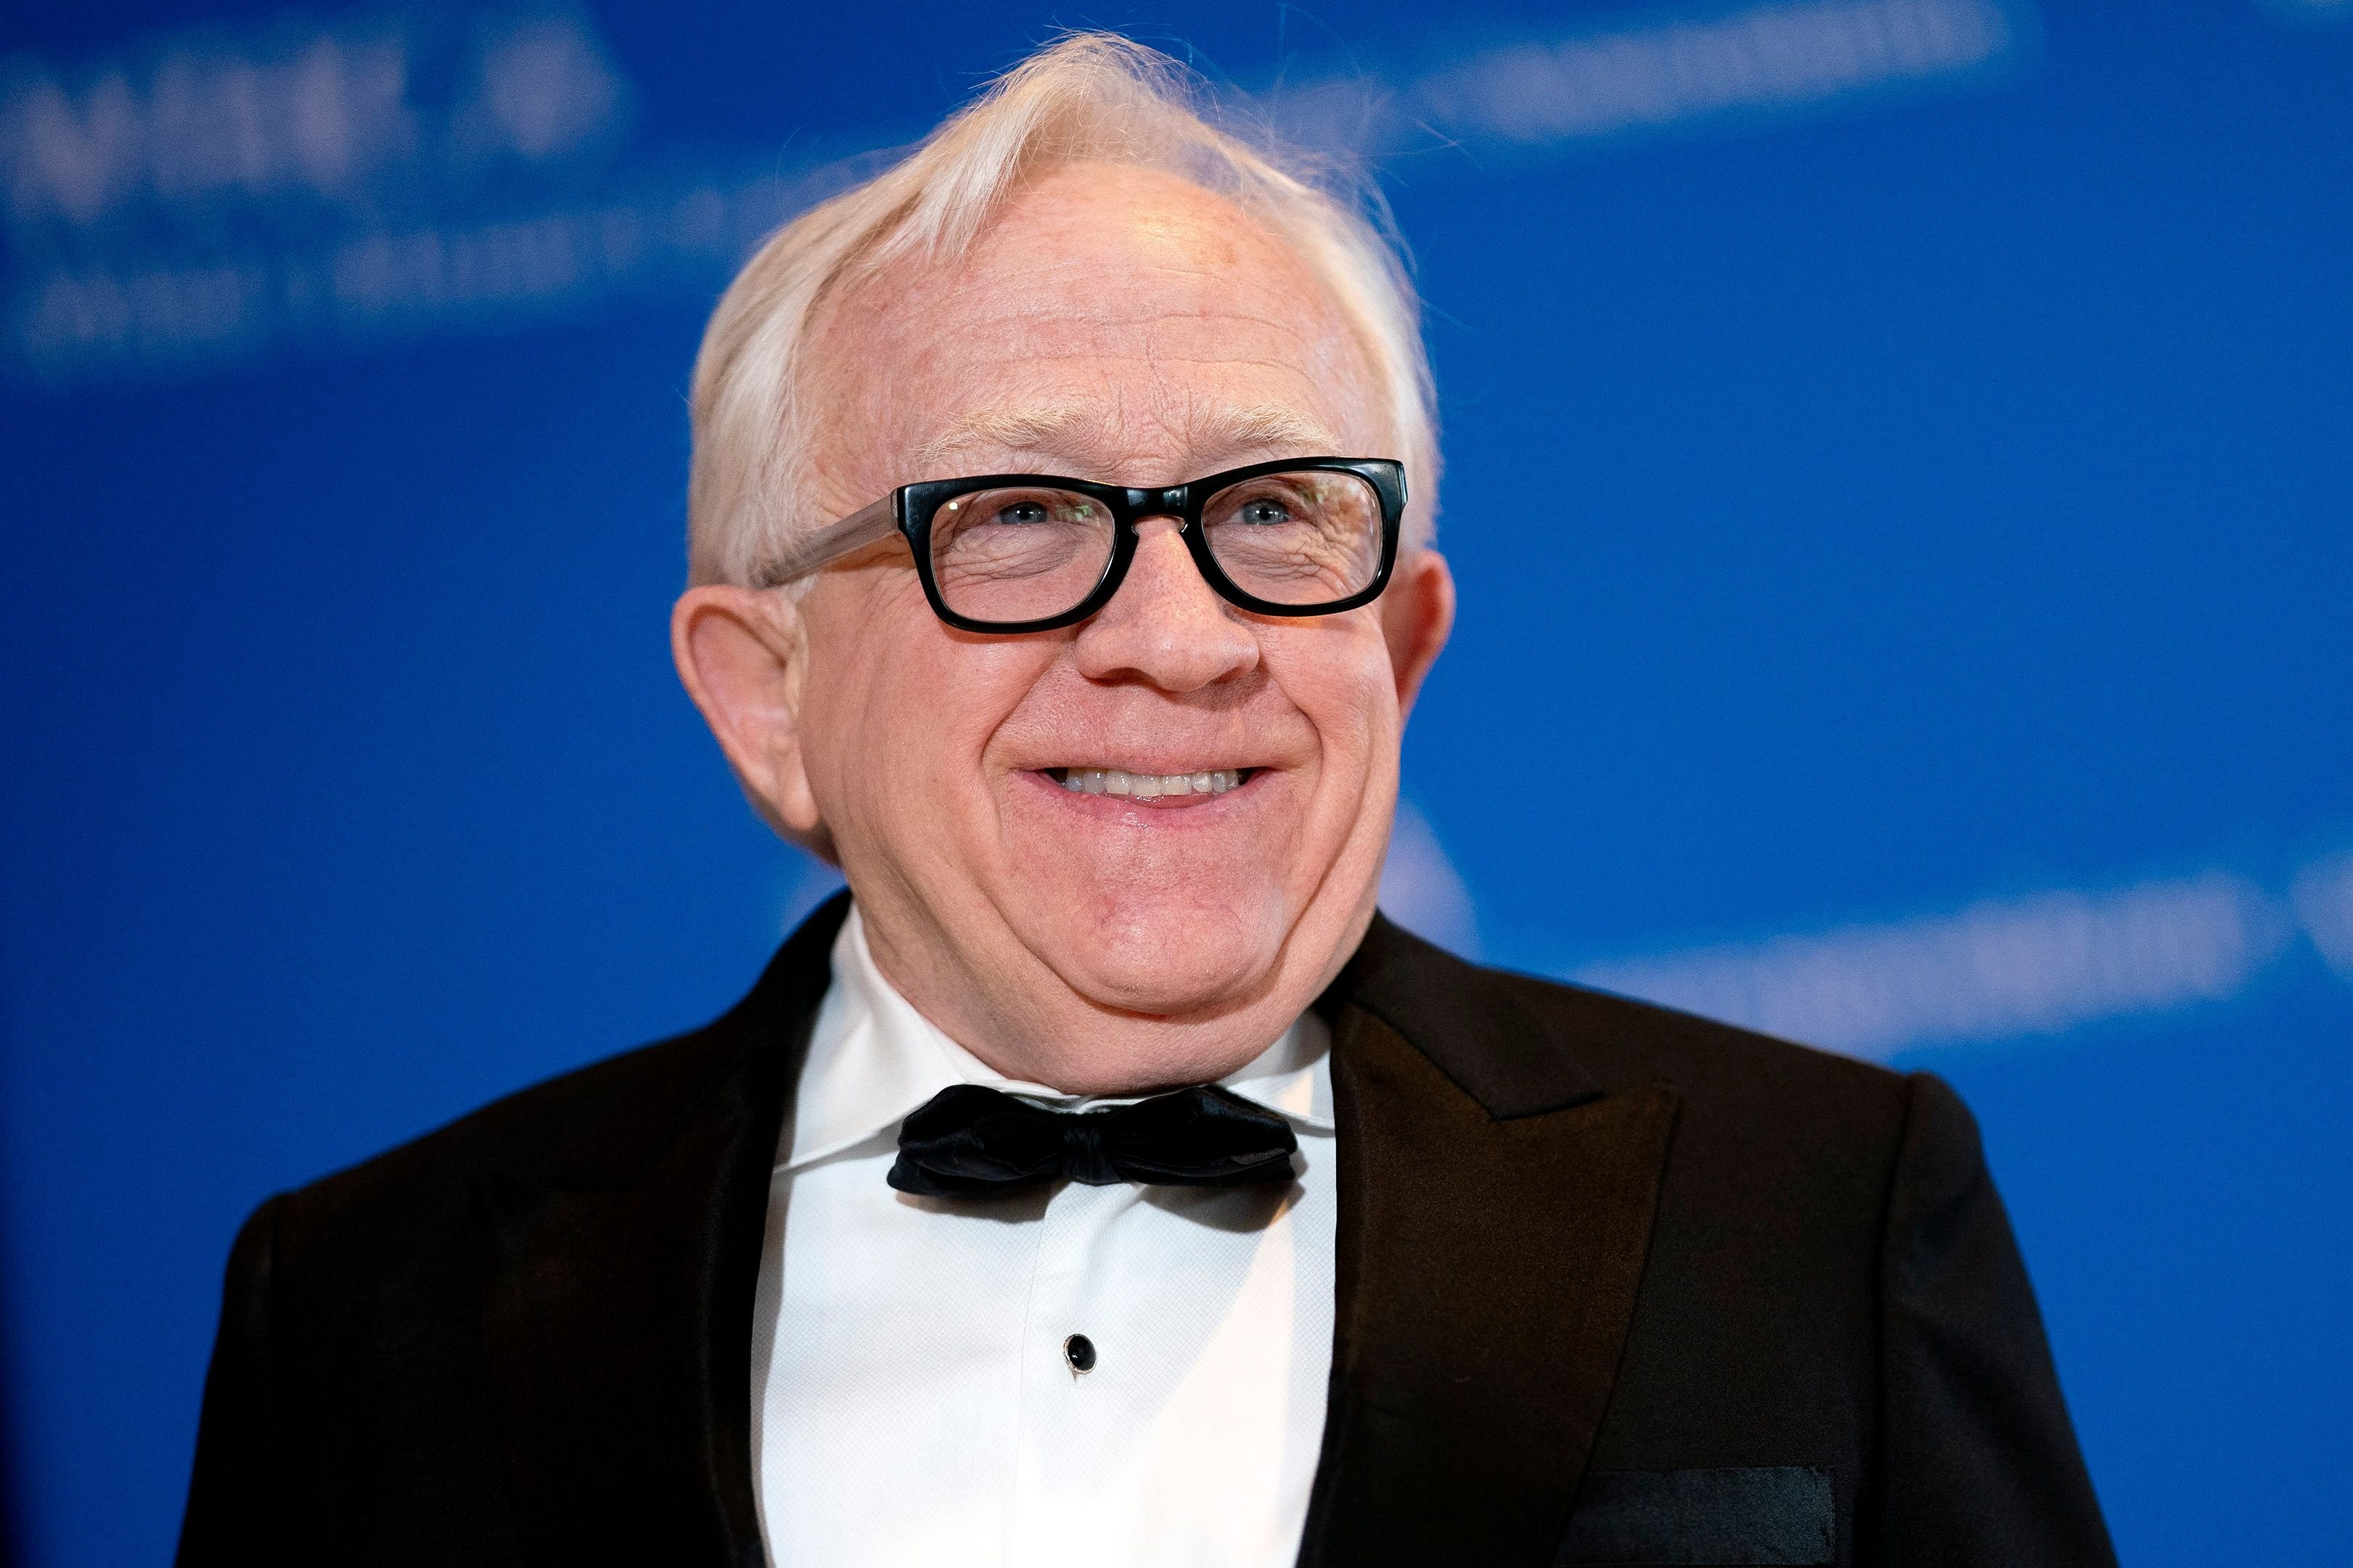 Leslie Jordan arrives for the White House Correspondents Association gala at the Washington Hilton Hotel in Washington, DC, on April 30, 2022. | Source: Getty Images